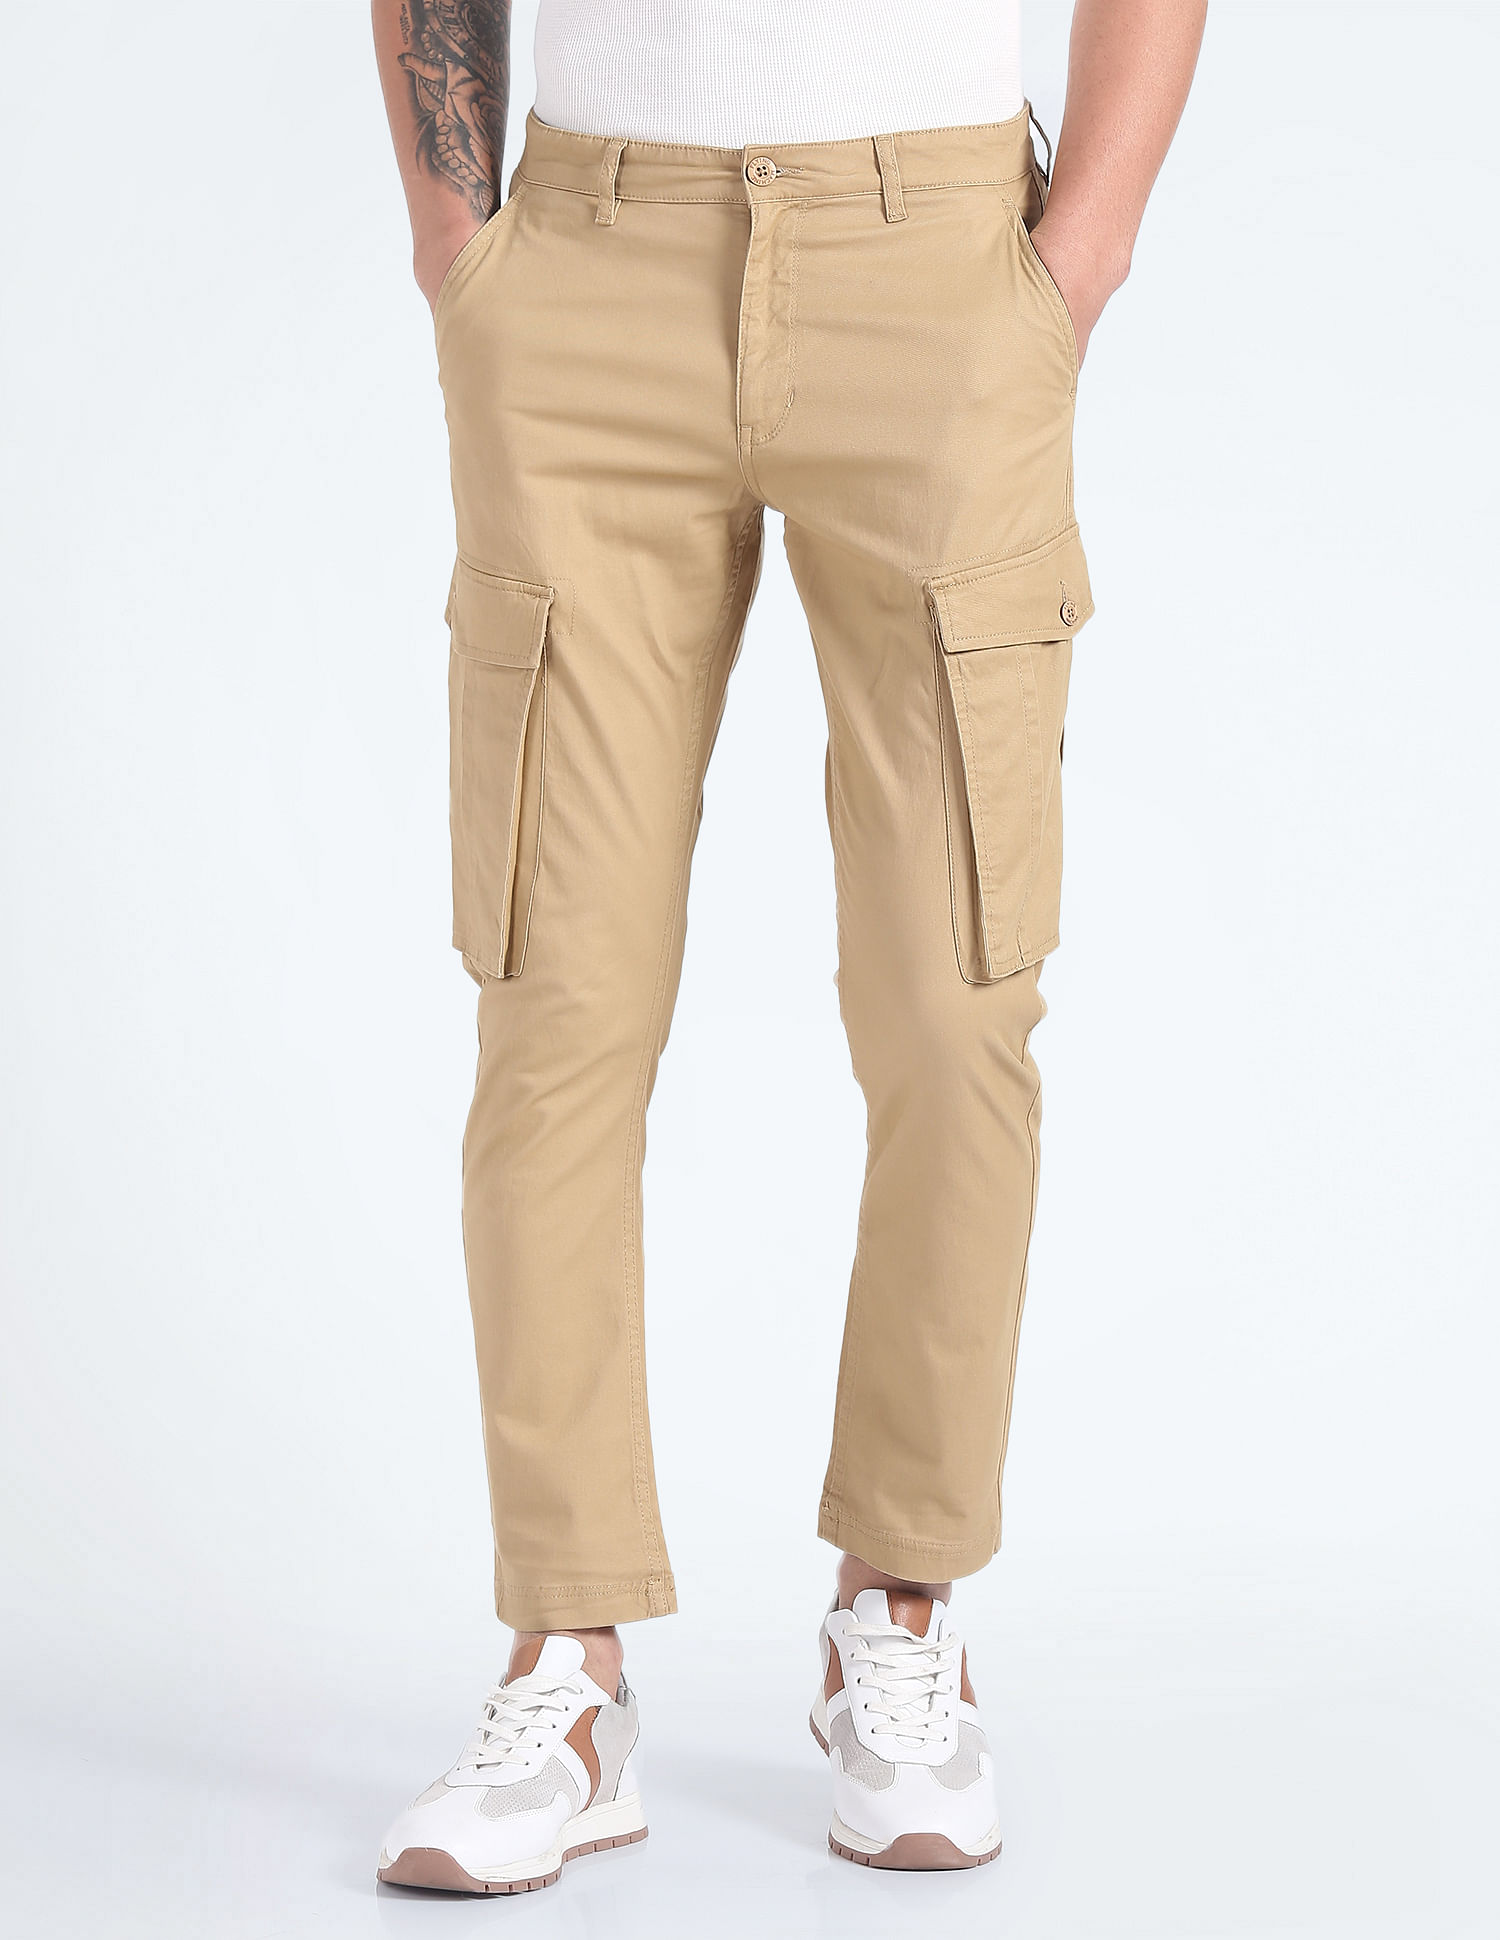 Men Letter Patched Cargo Trousers | Cargo pants outfit, Pants outfit men, Khaki  cargo pants